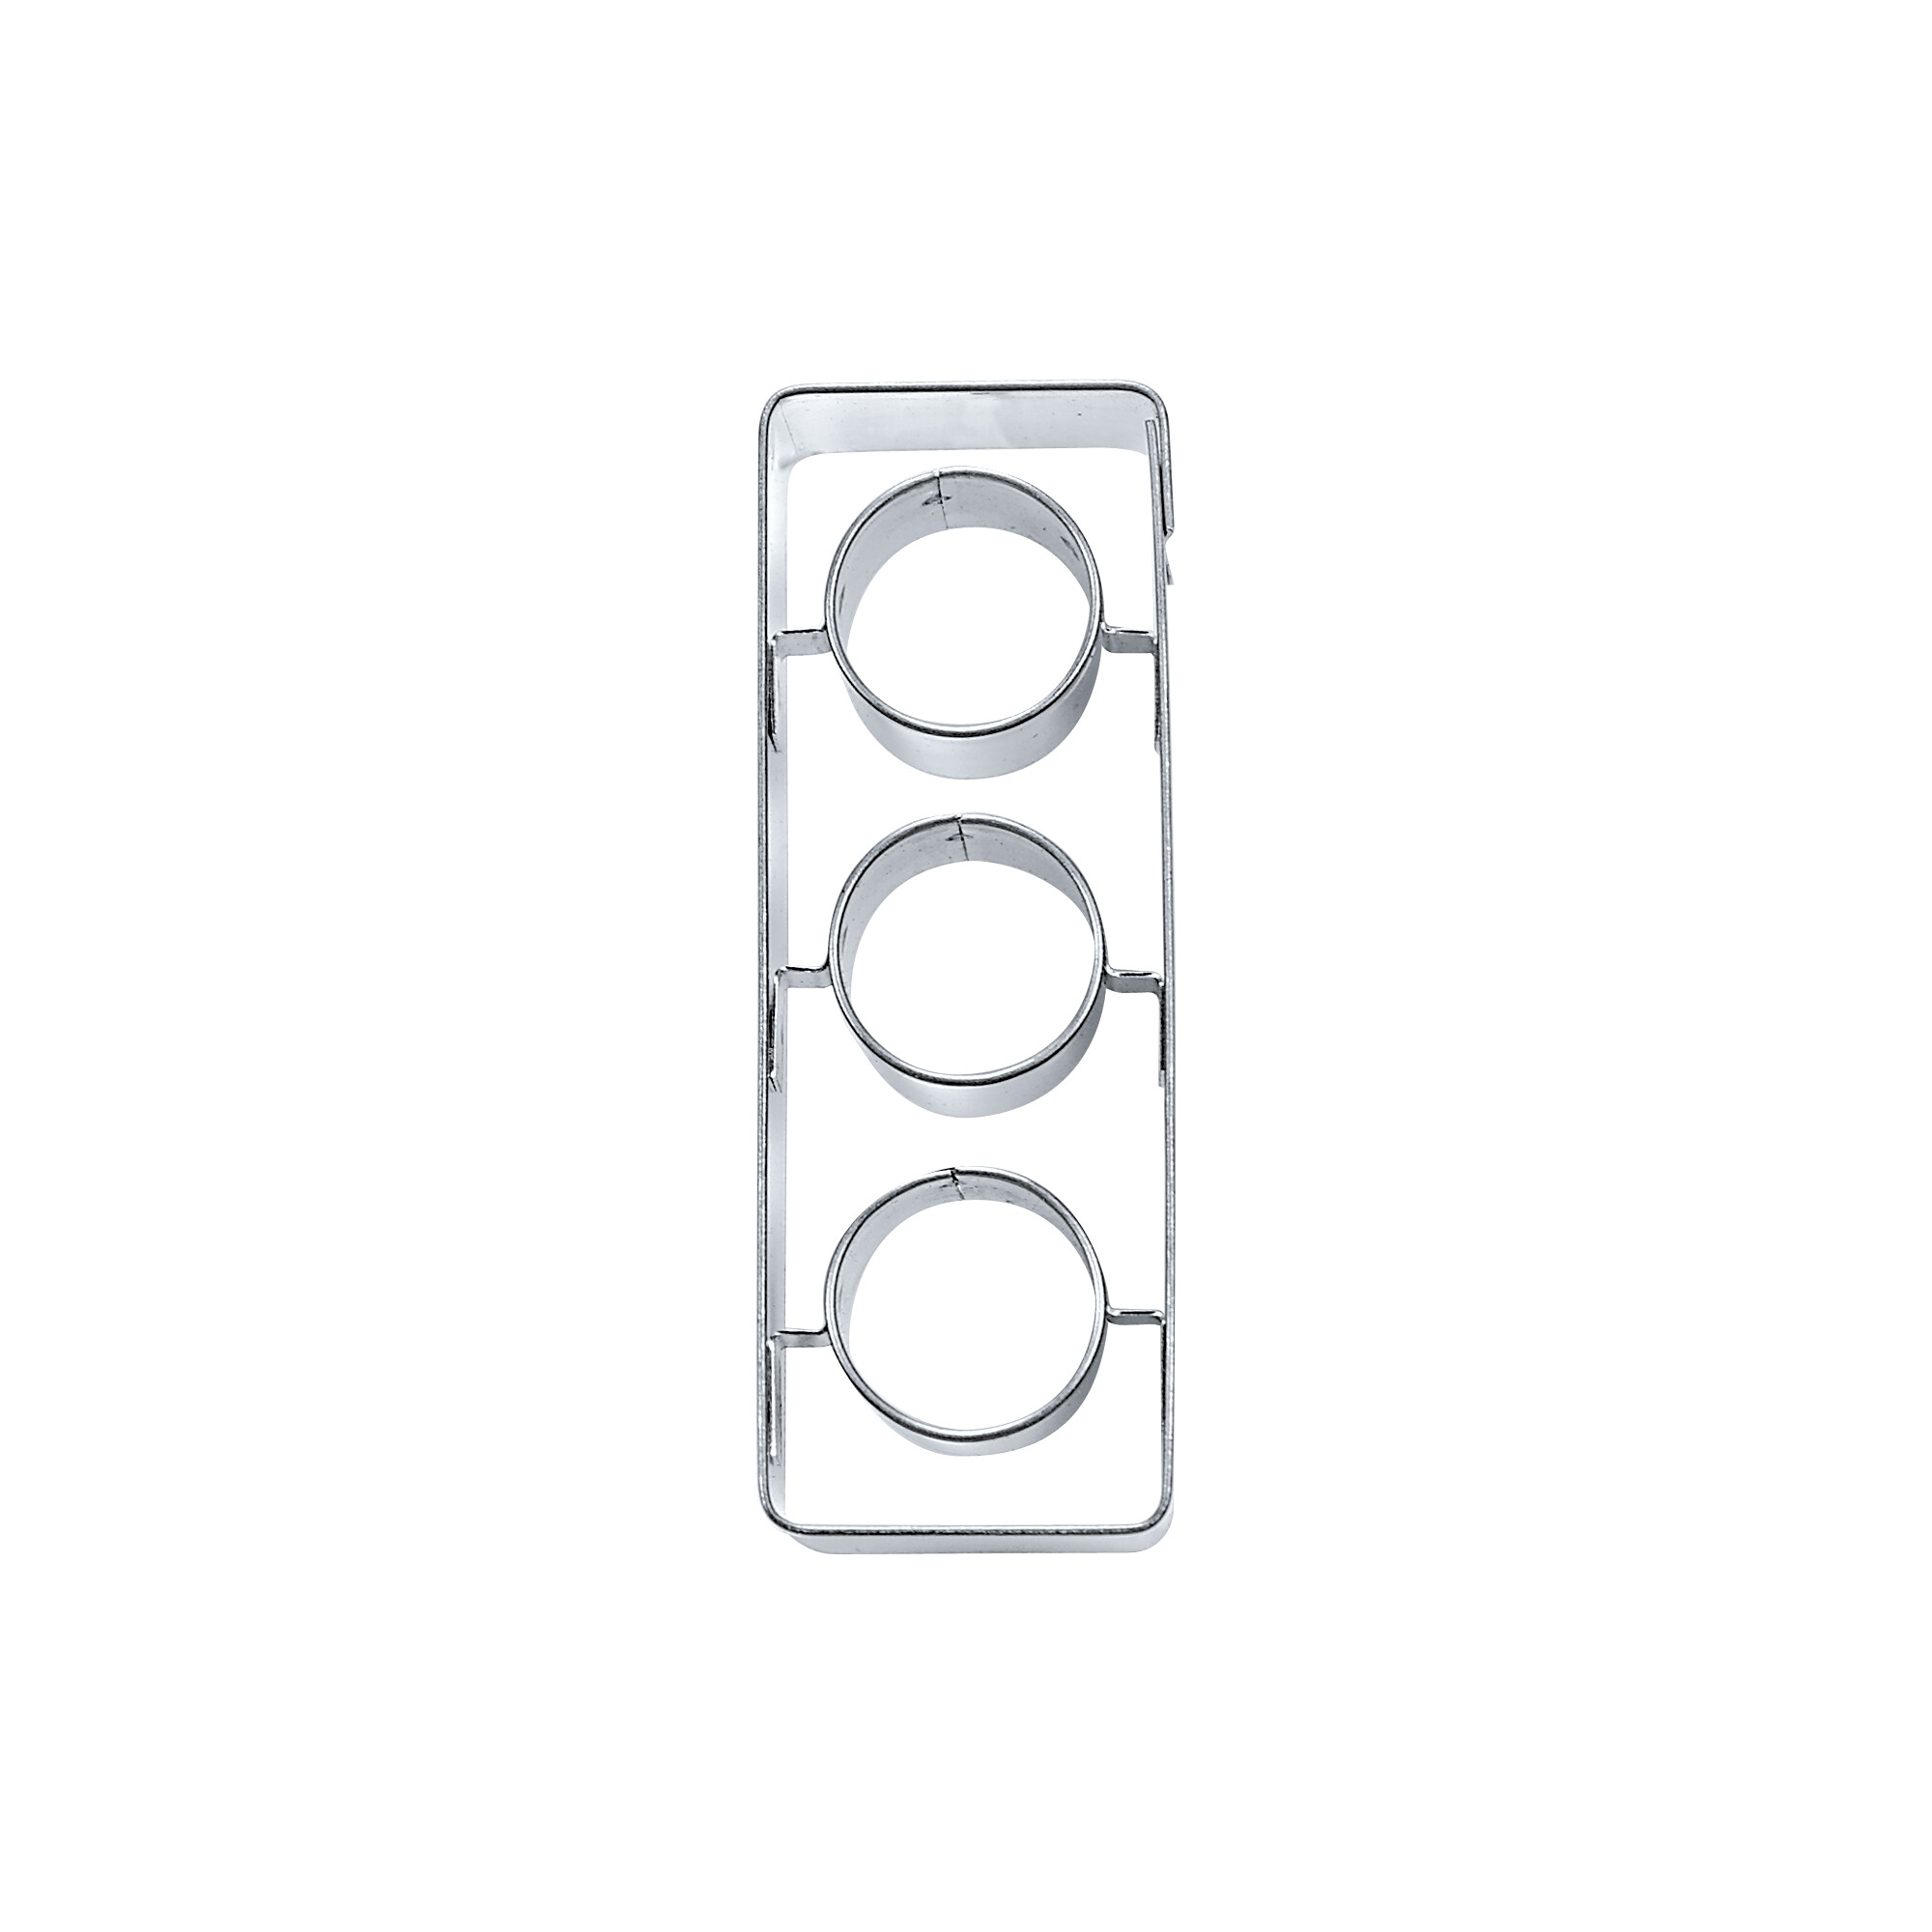 Cookie cutter with stamp – Trafic light